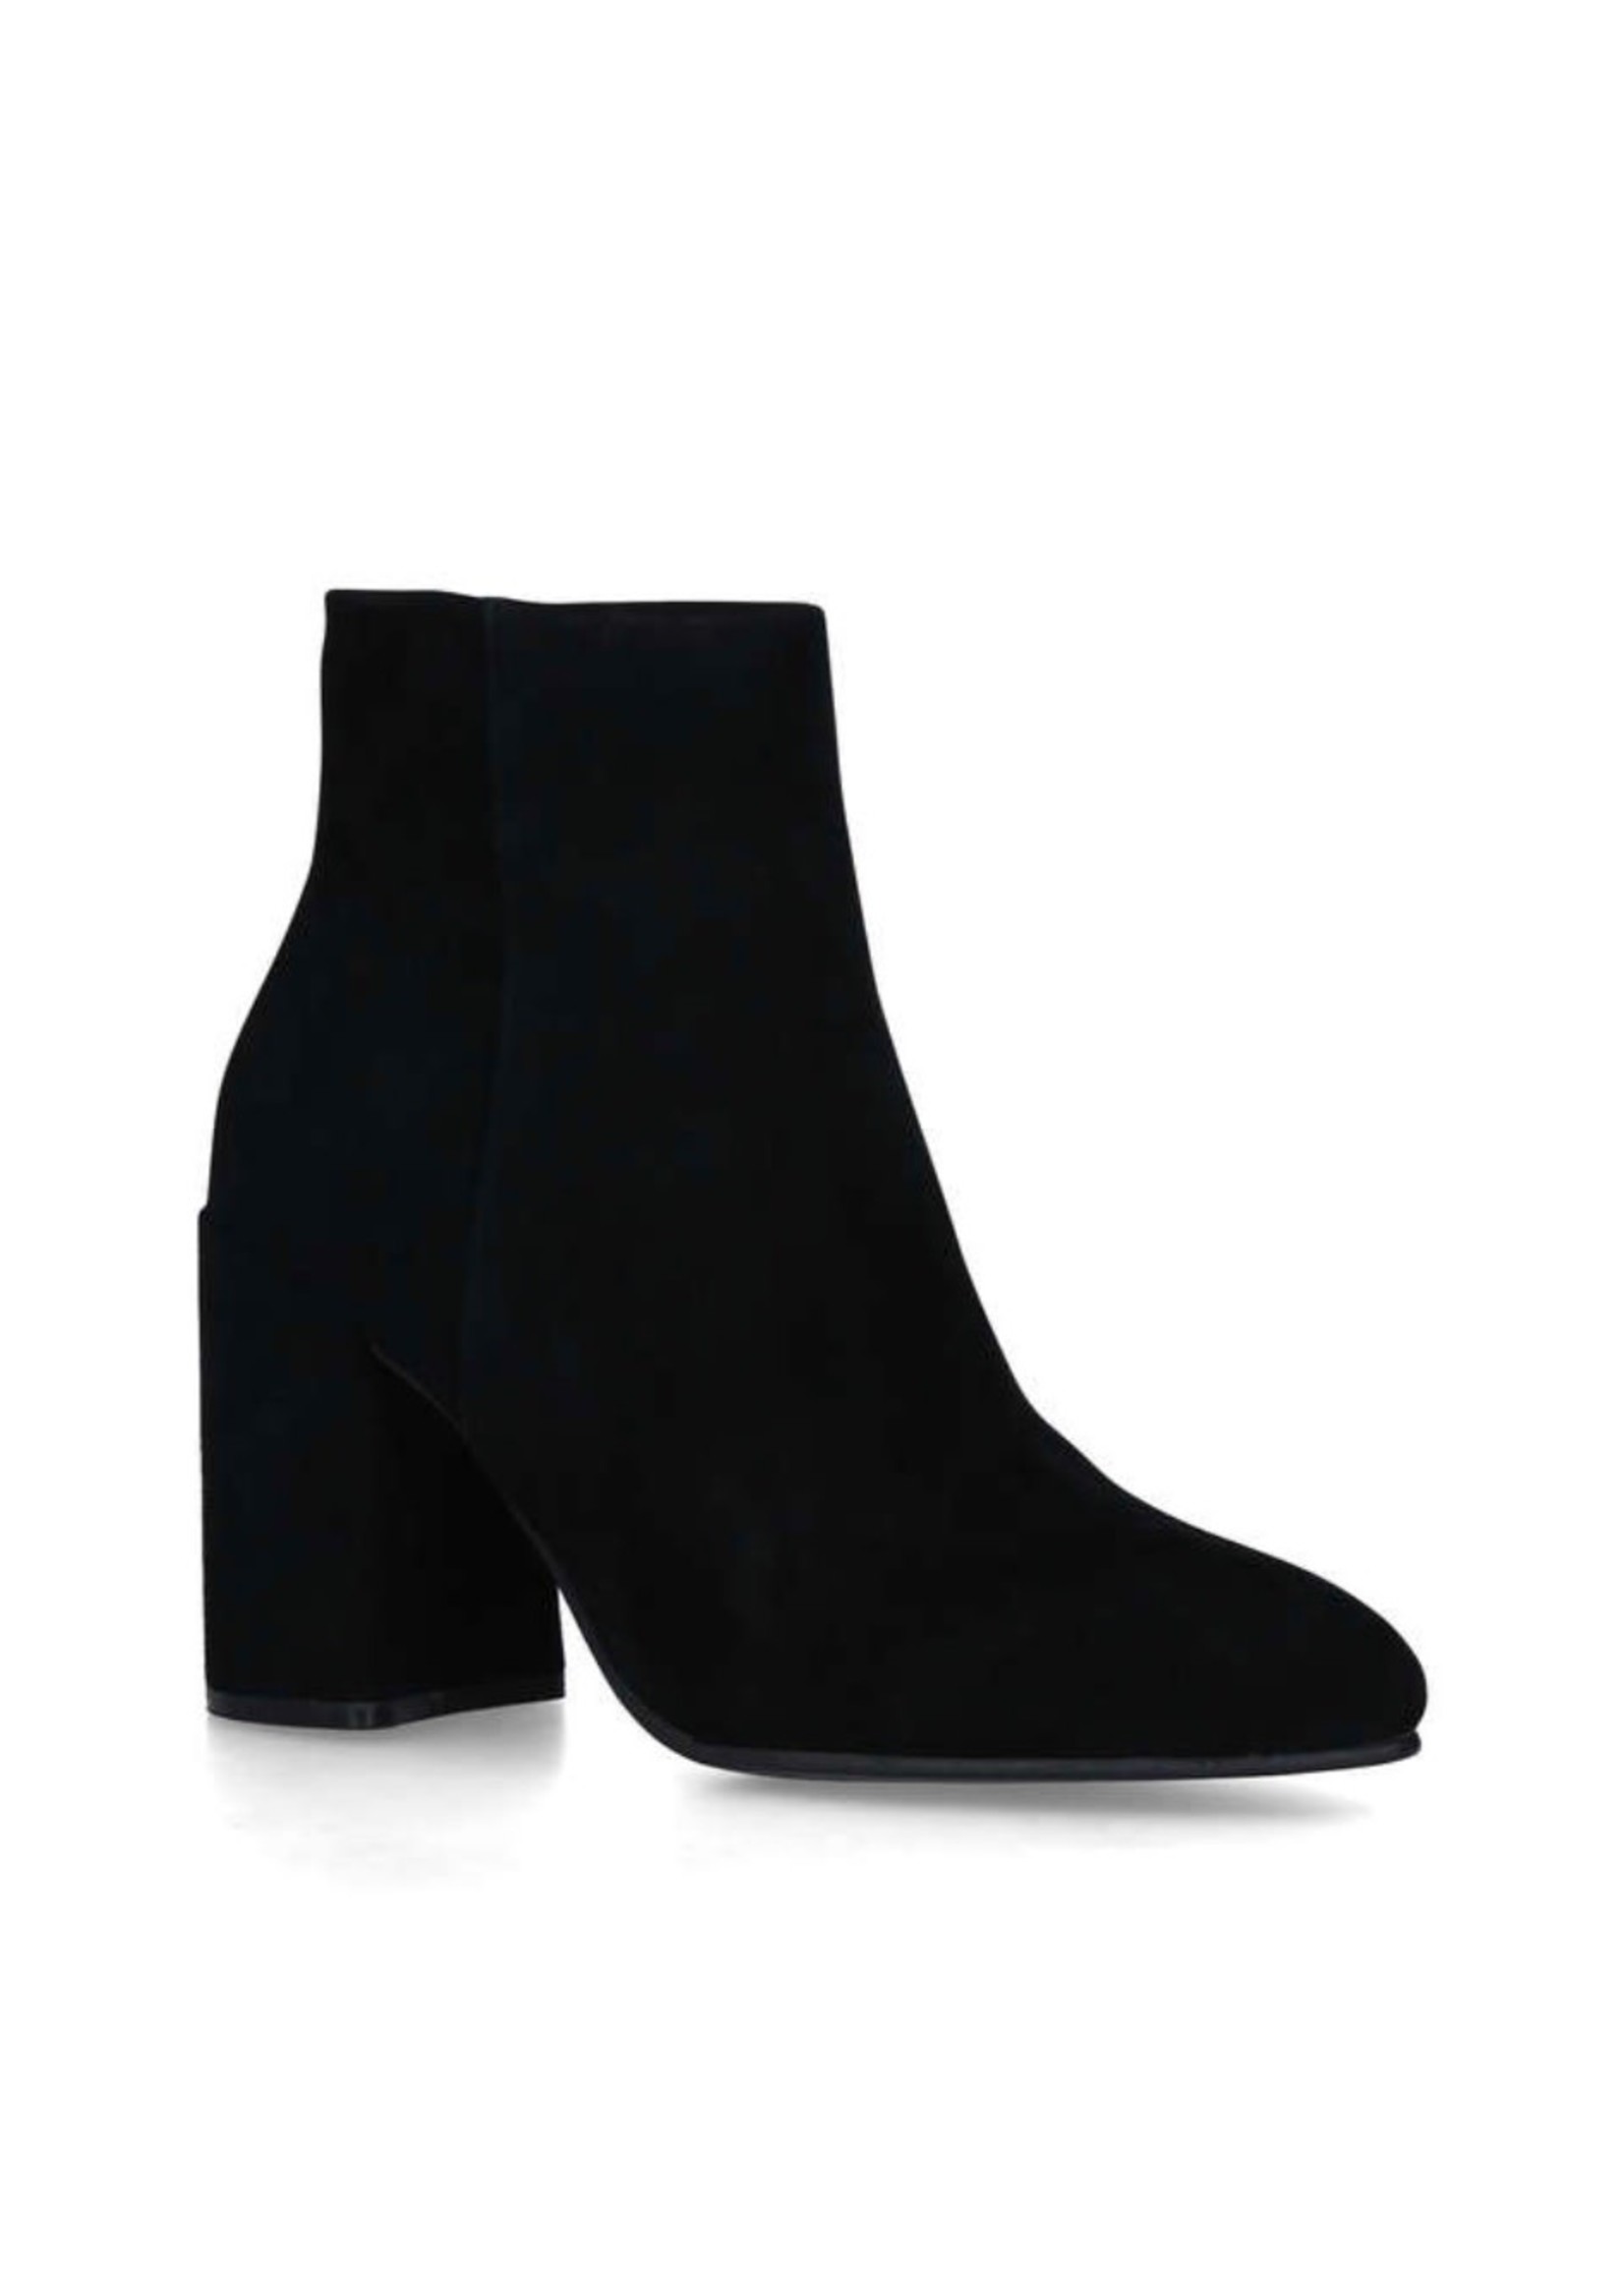 STEVE MADDEN The THERESE Suede Booties